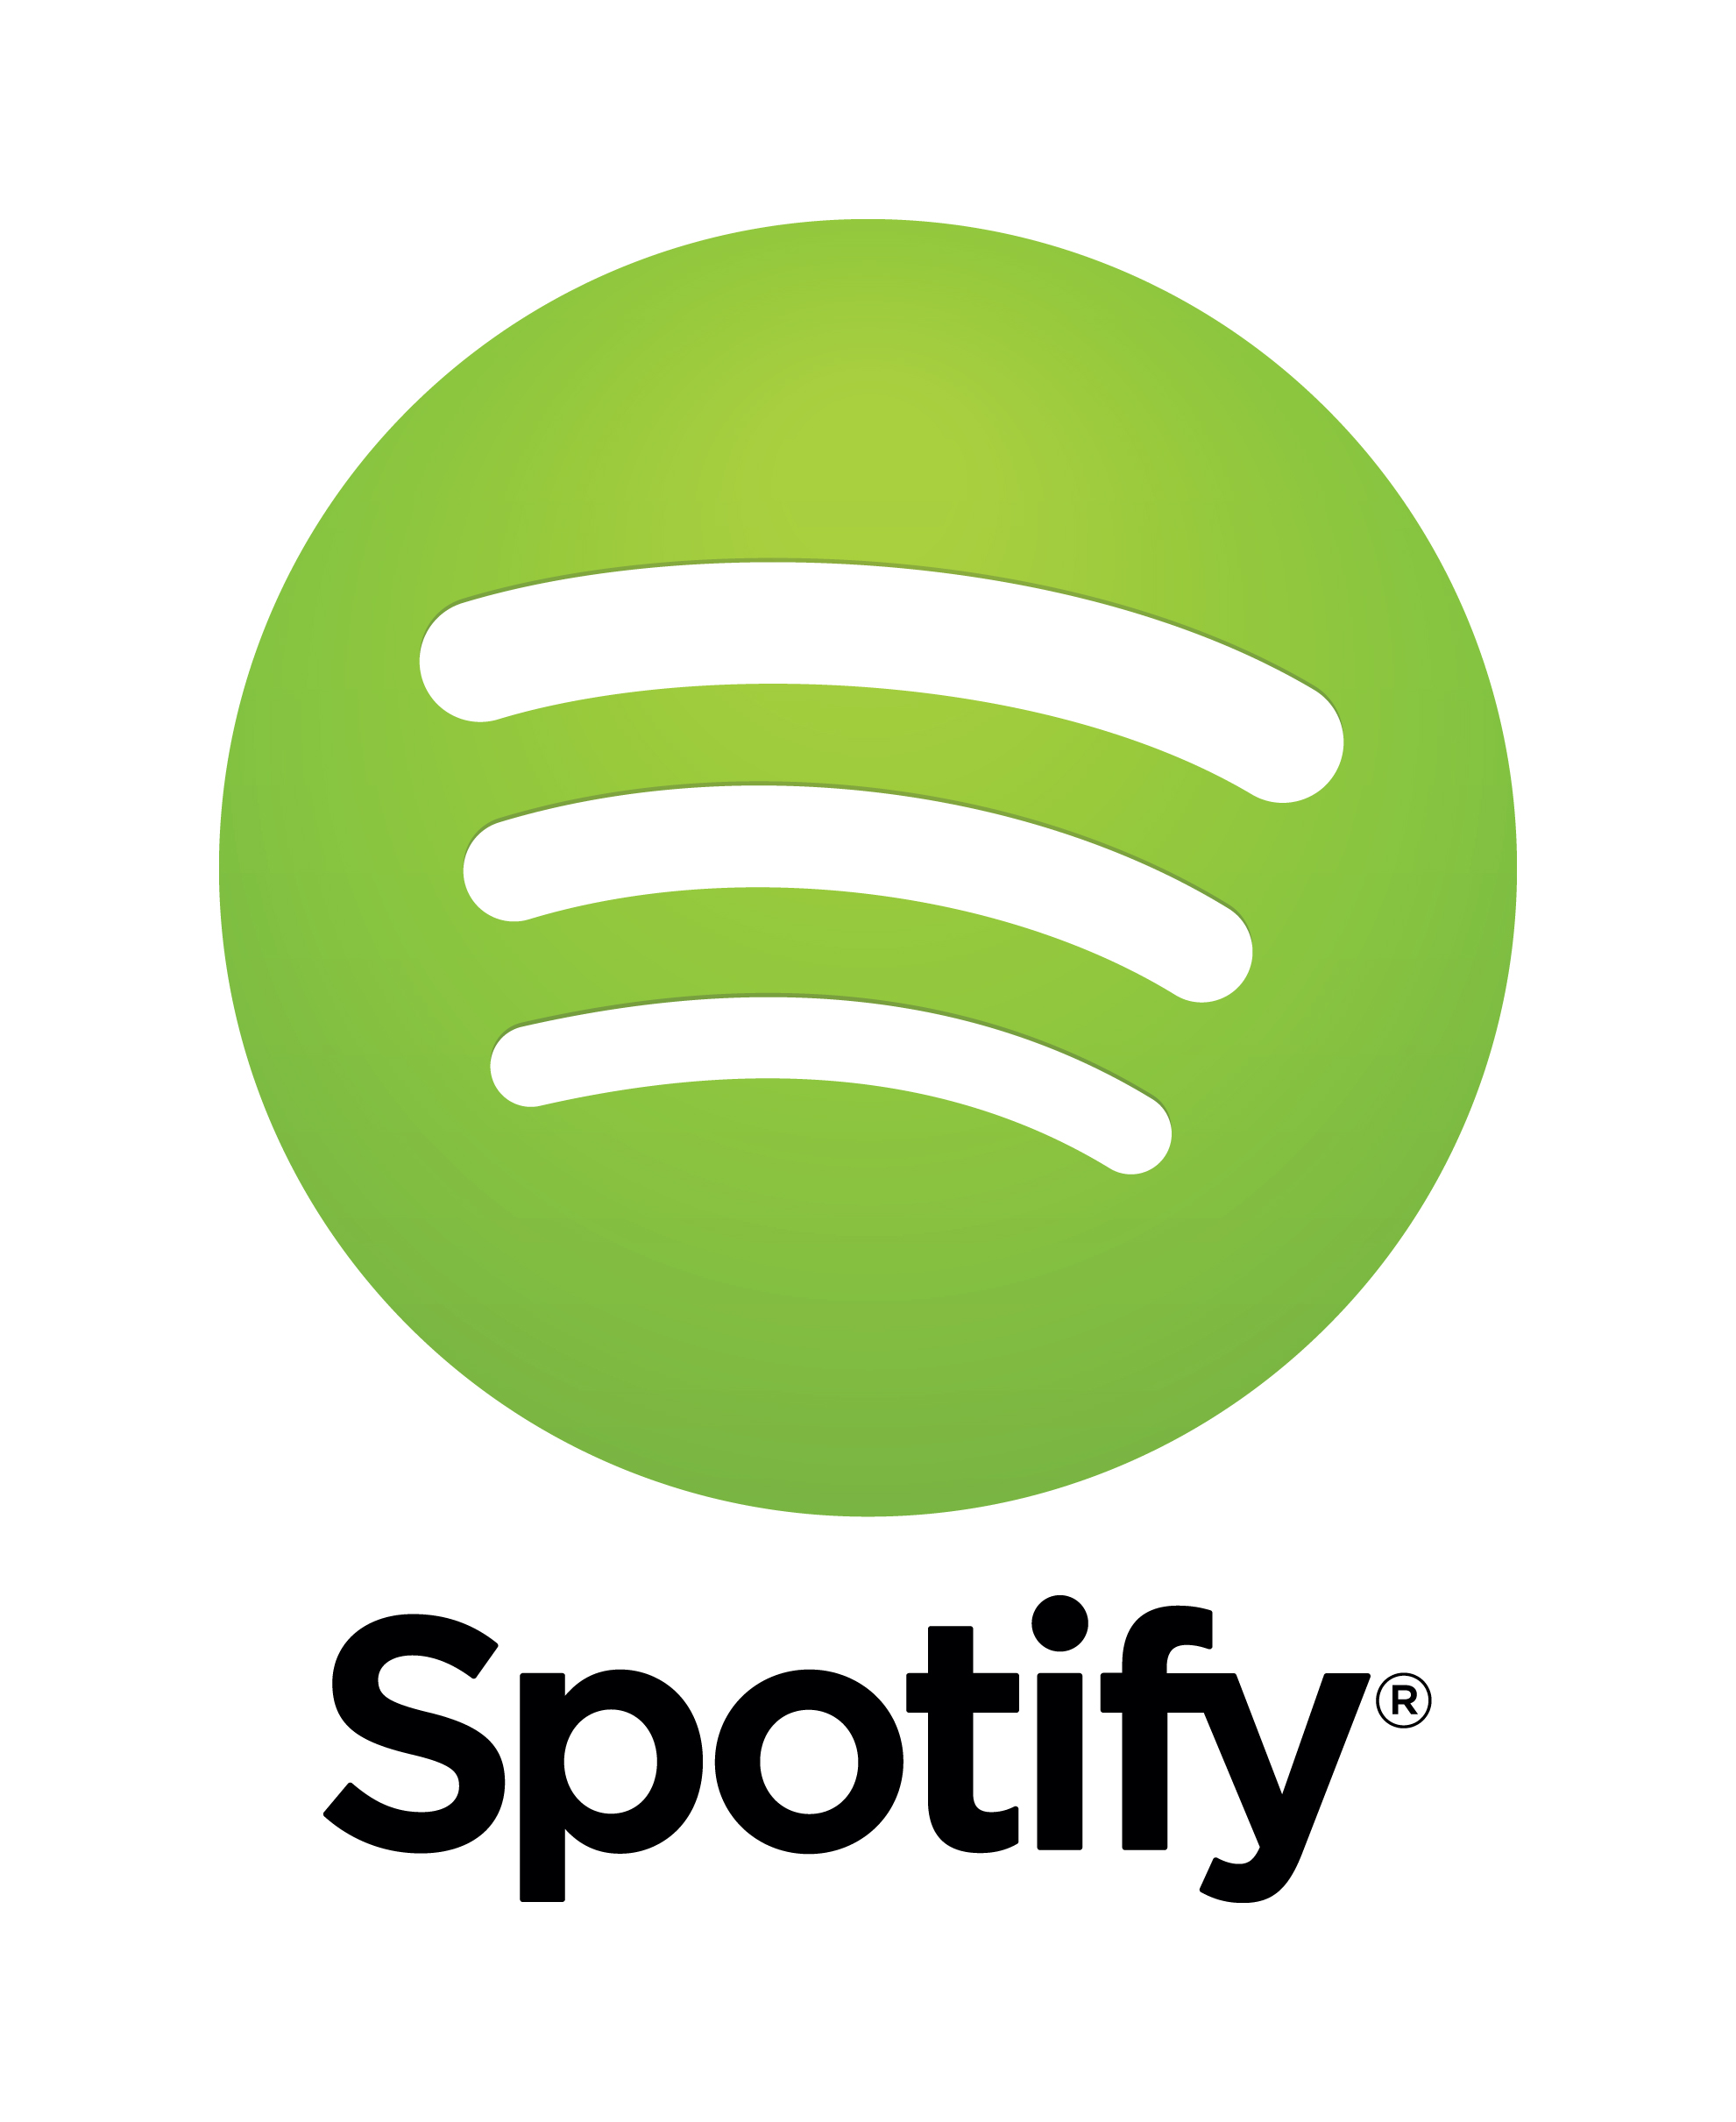 The NEW Spotify